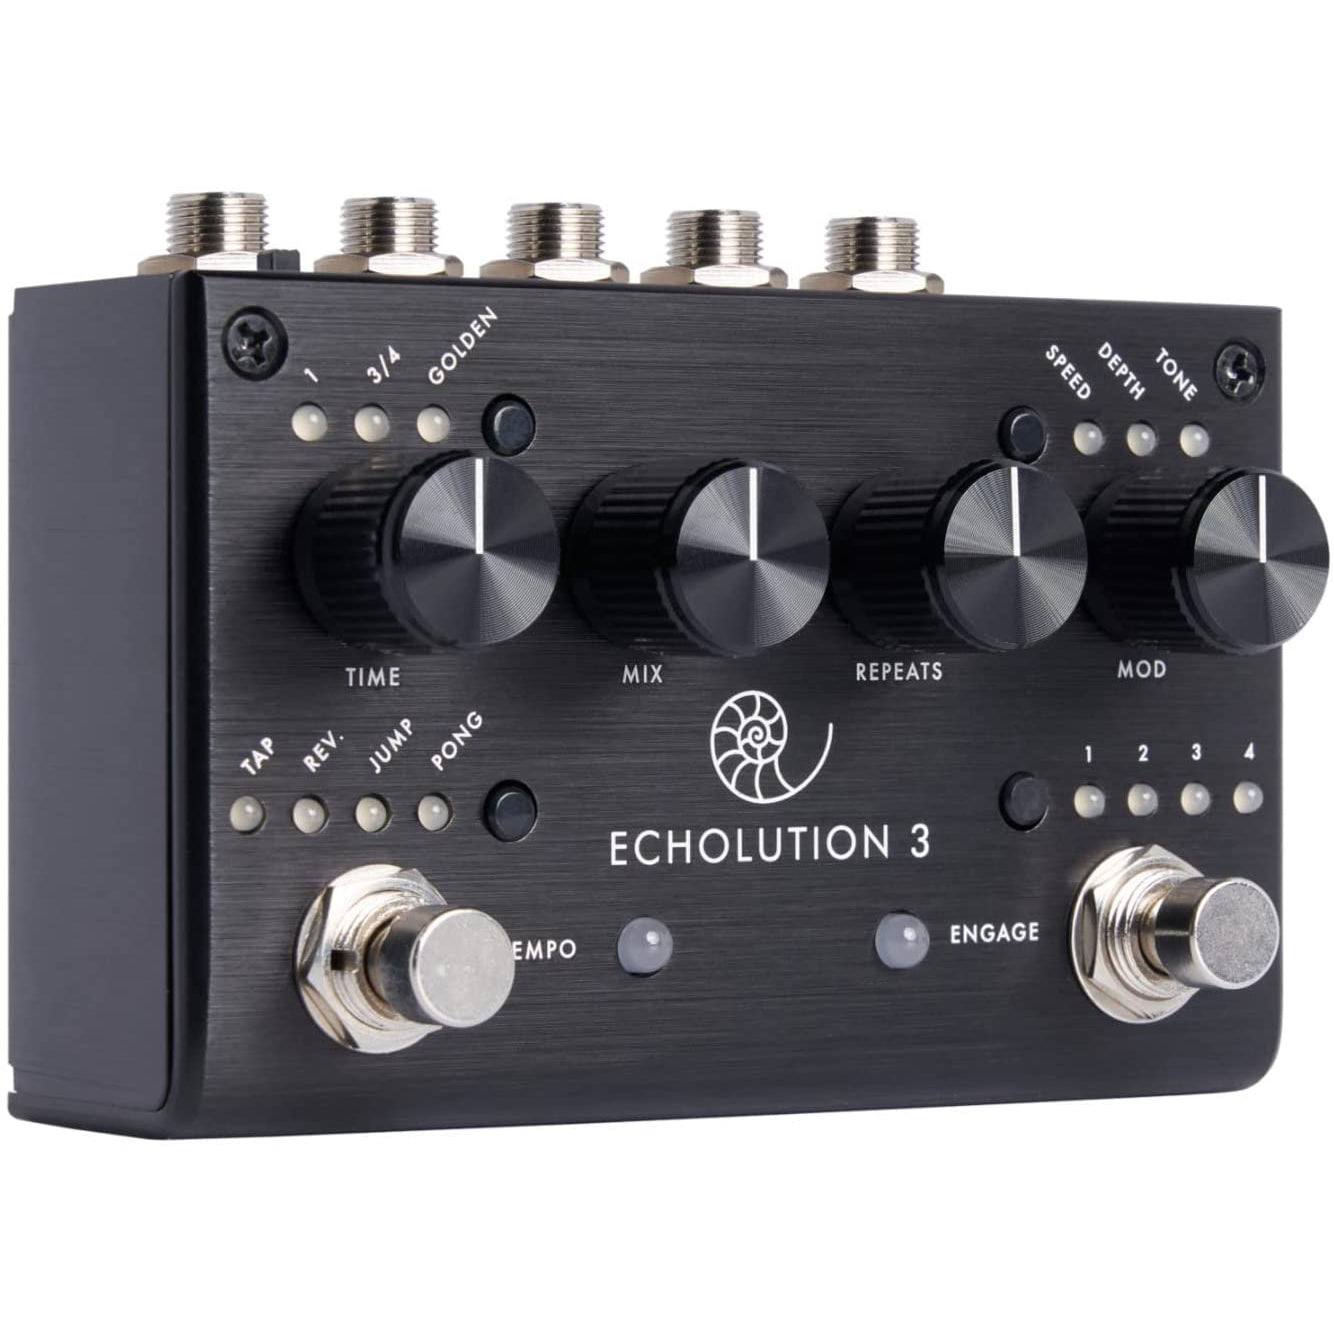 Pigtronix Echolution 3 Stereo Multi Tap Delay